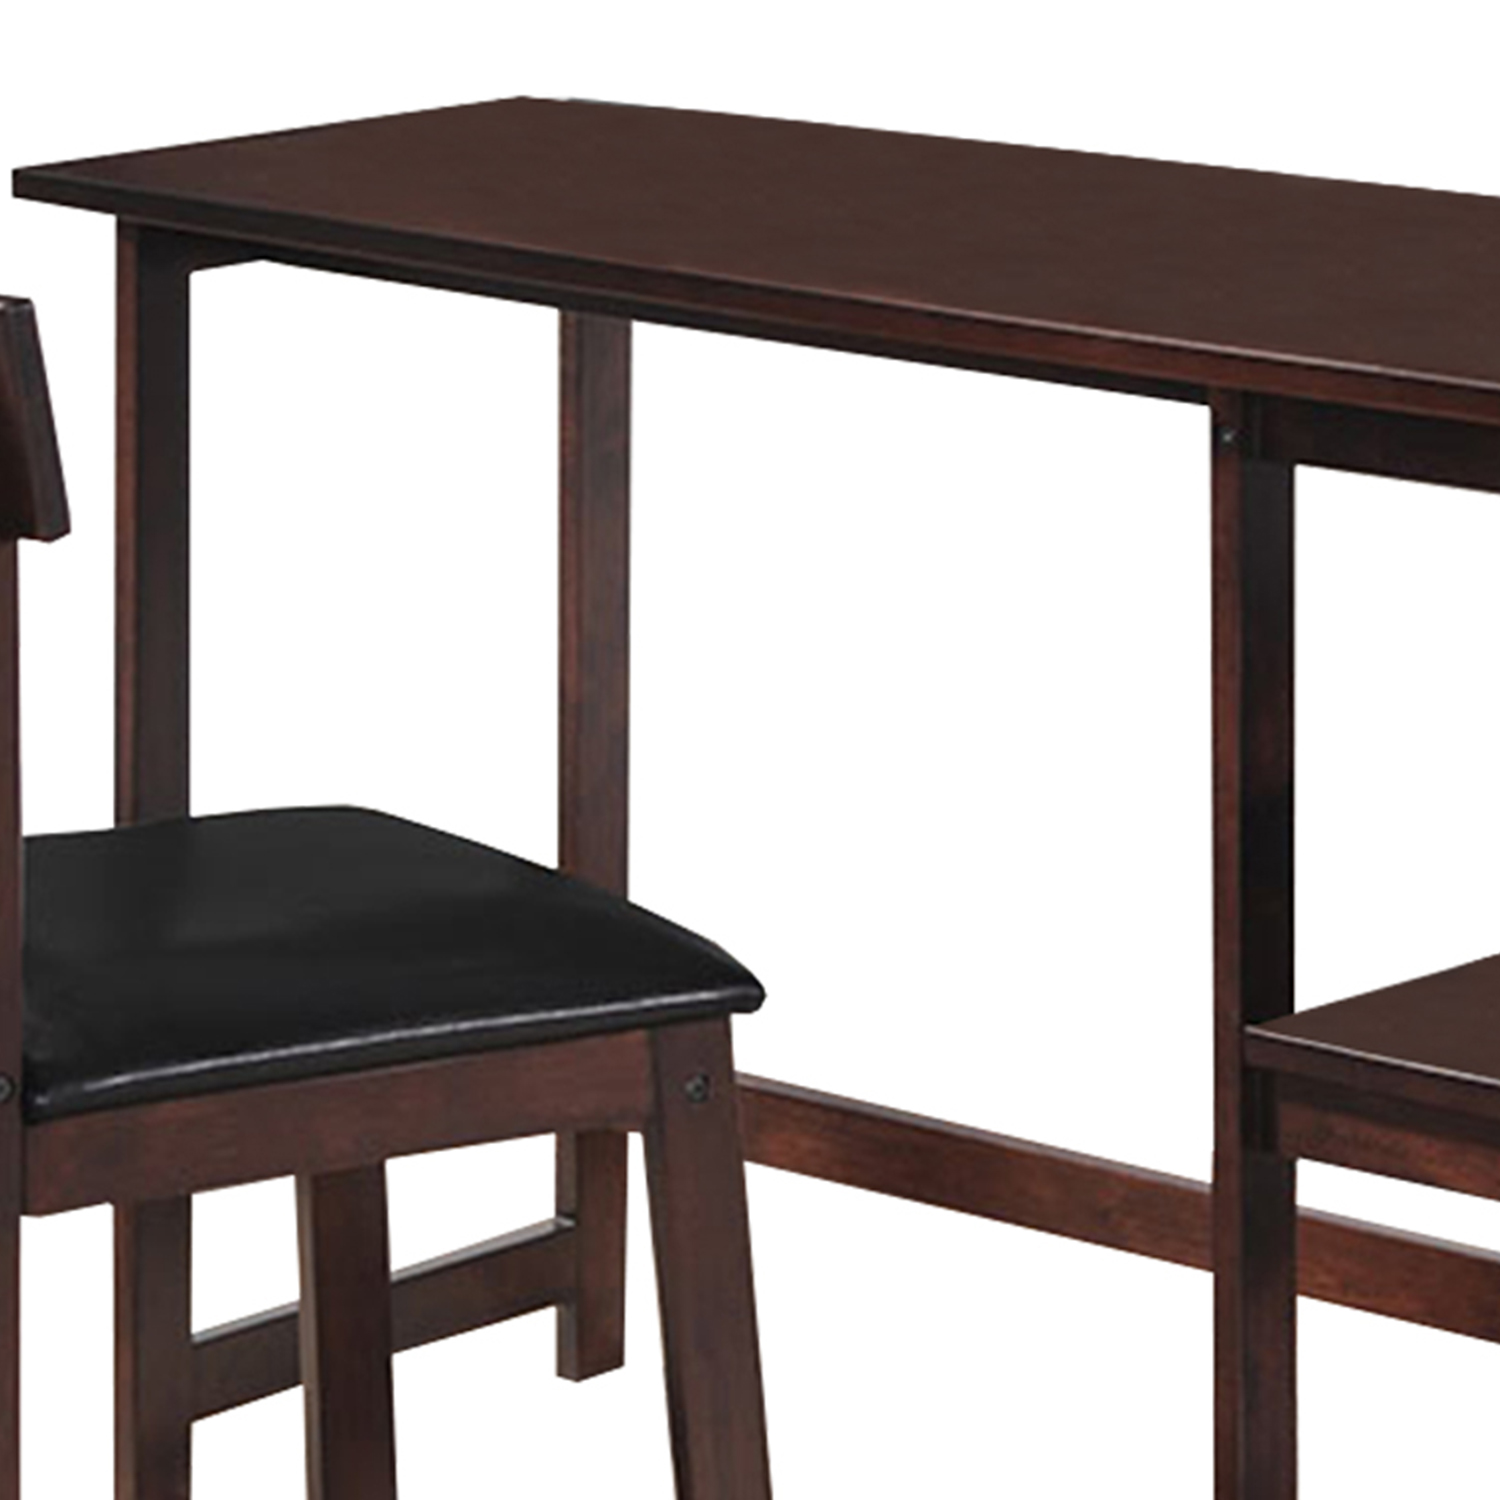 19" X 47" X 39" 2Pc Black Pu And Espresso Pack Desk And Chair